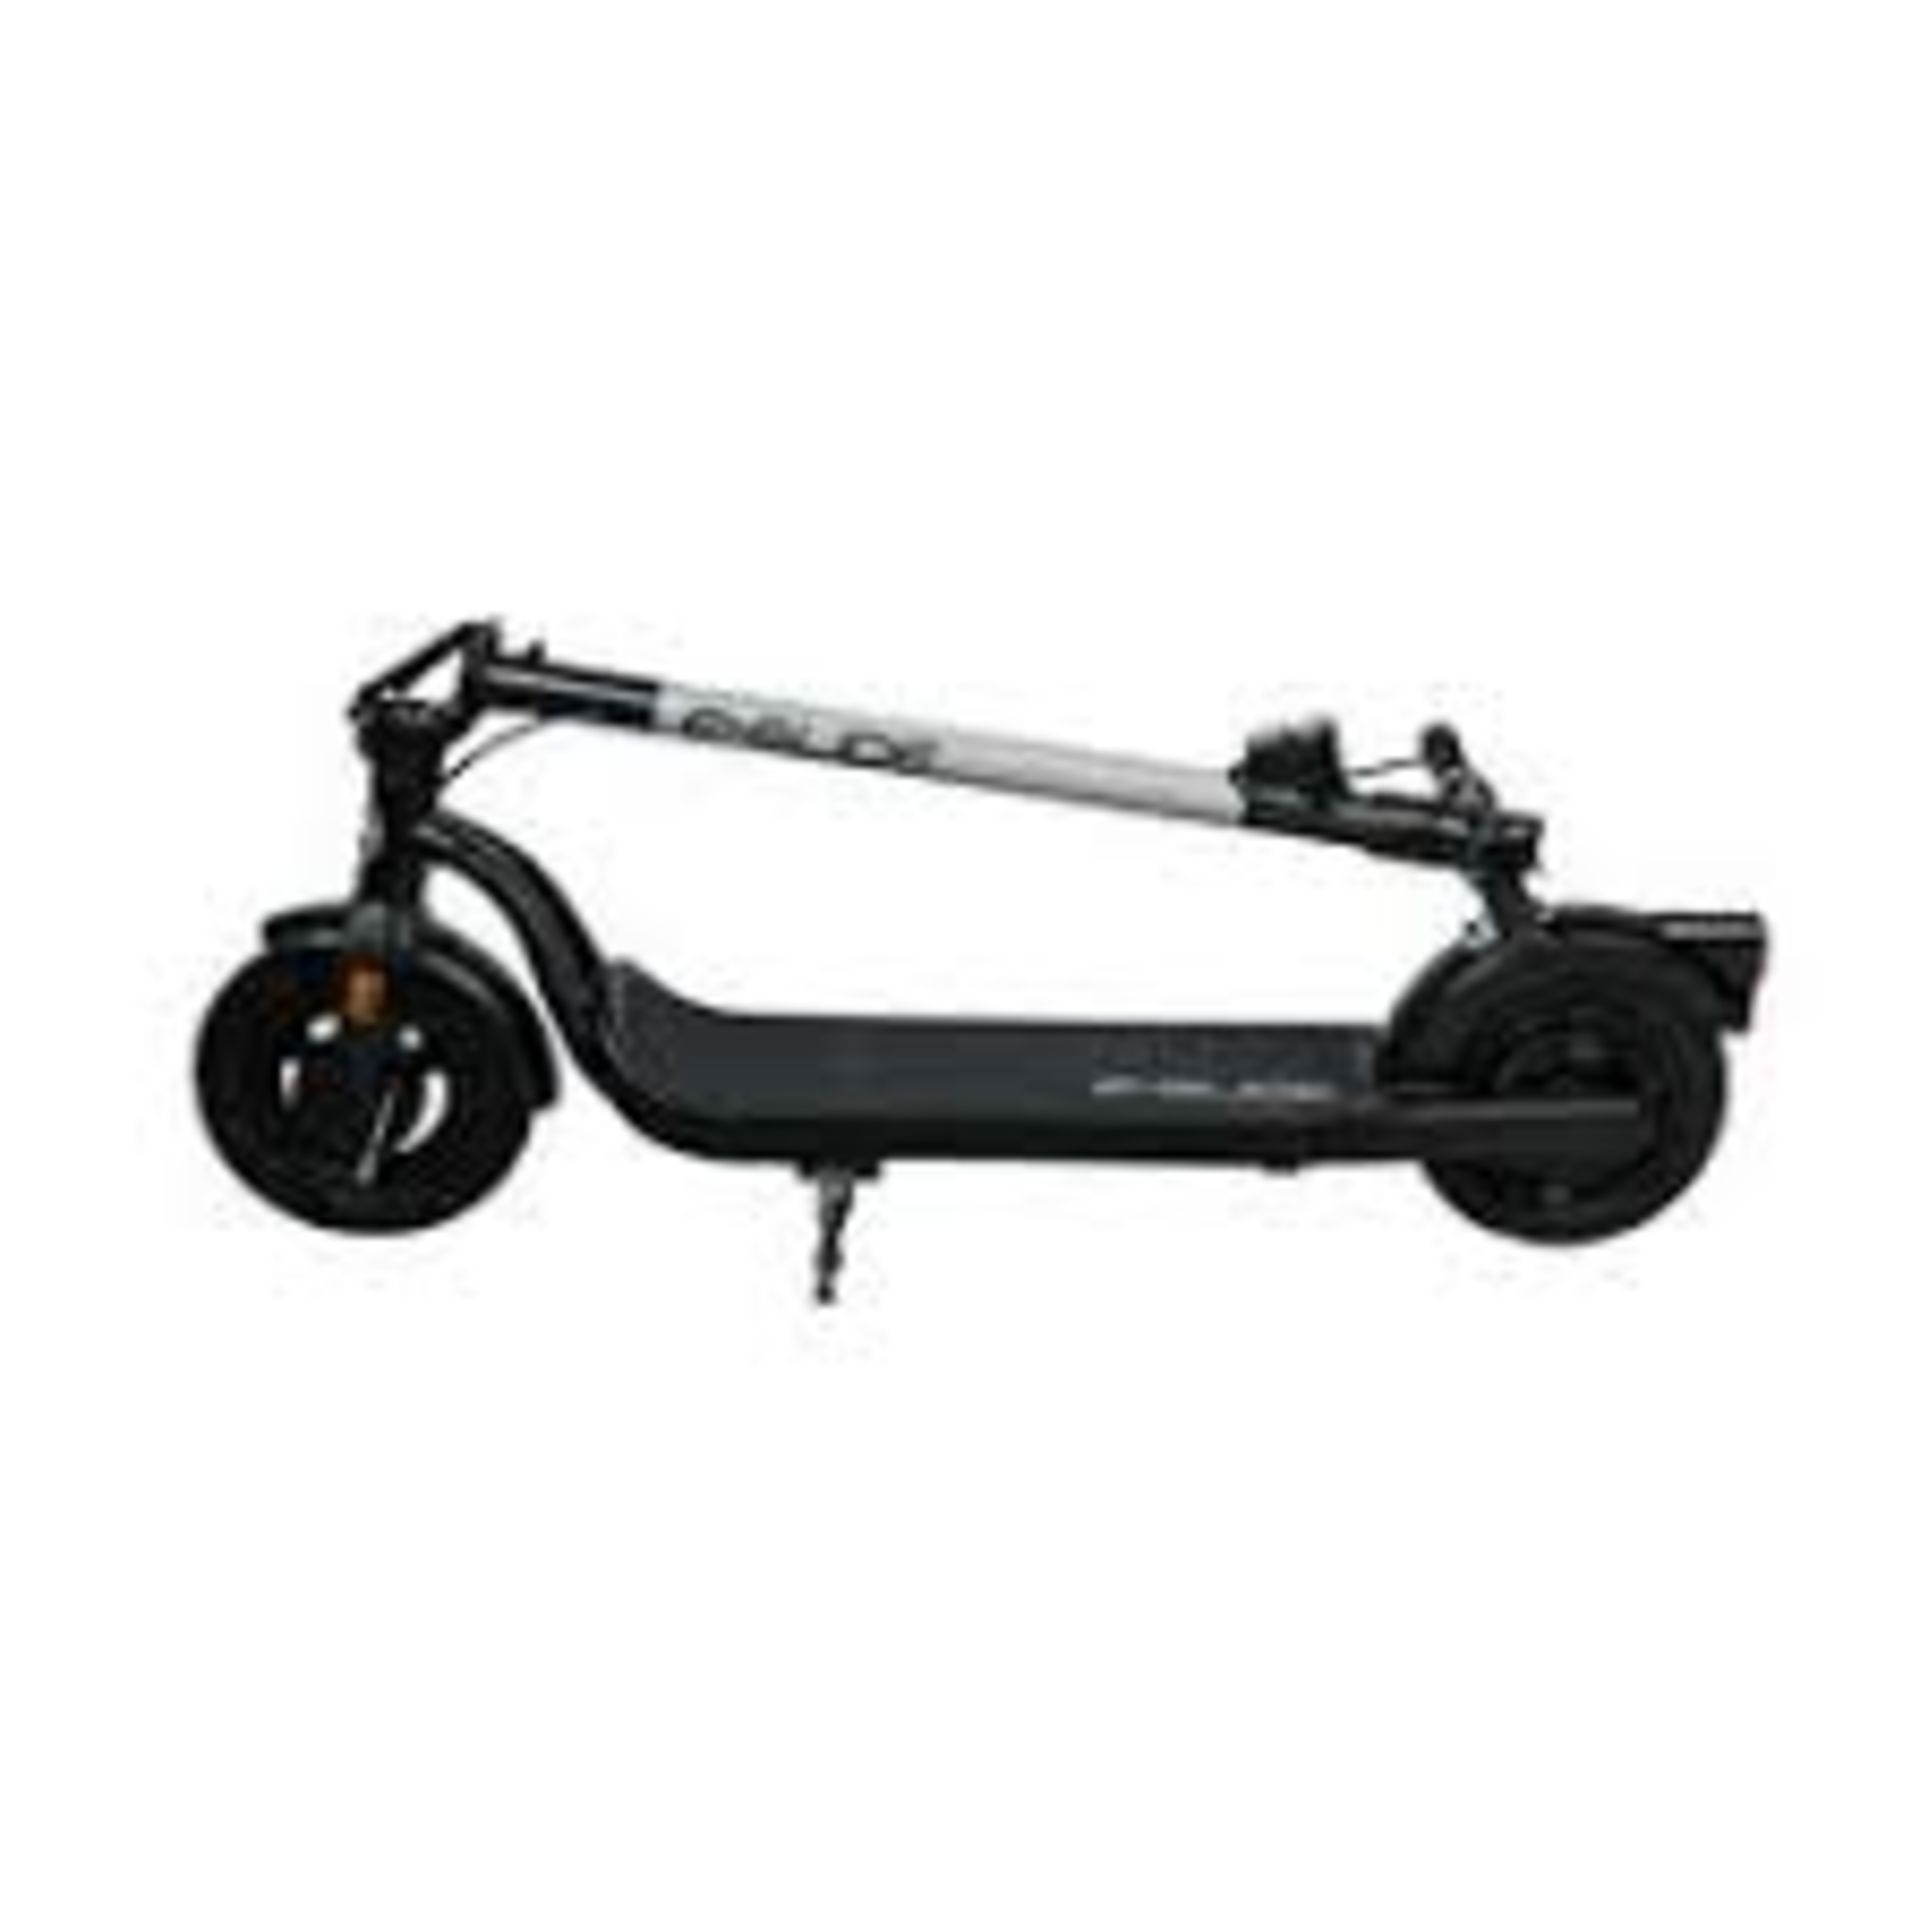 Trade Lot 4 x Brand New E-Glide V2 Electric Scooter Grey and Black RRP £599, Introducing a sleek and - Image 2 of 3